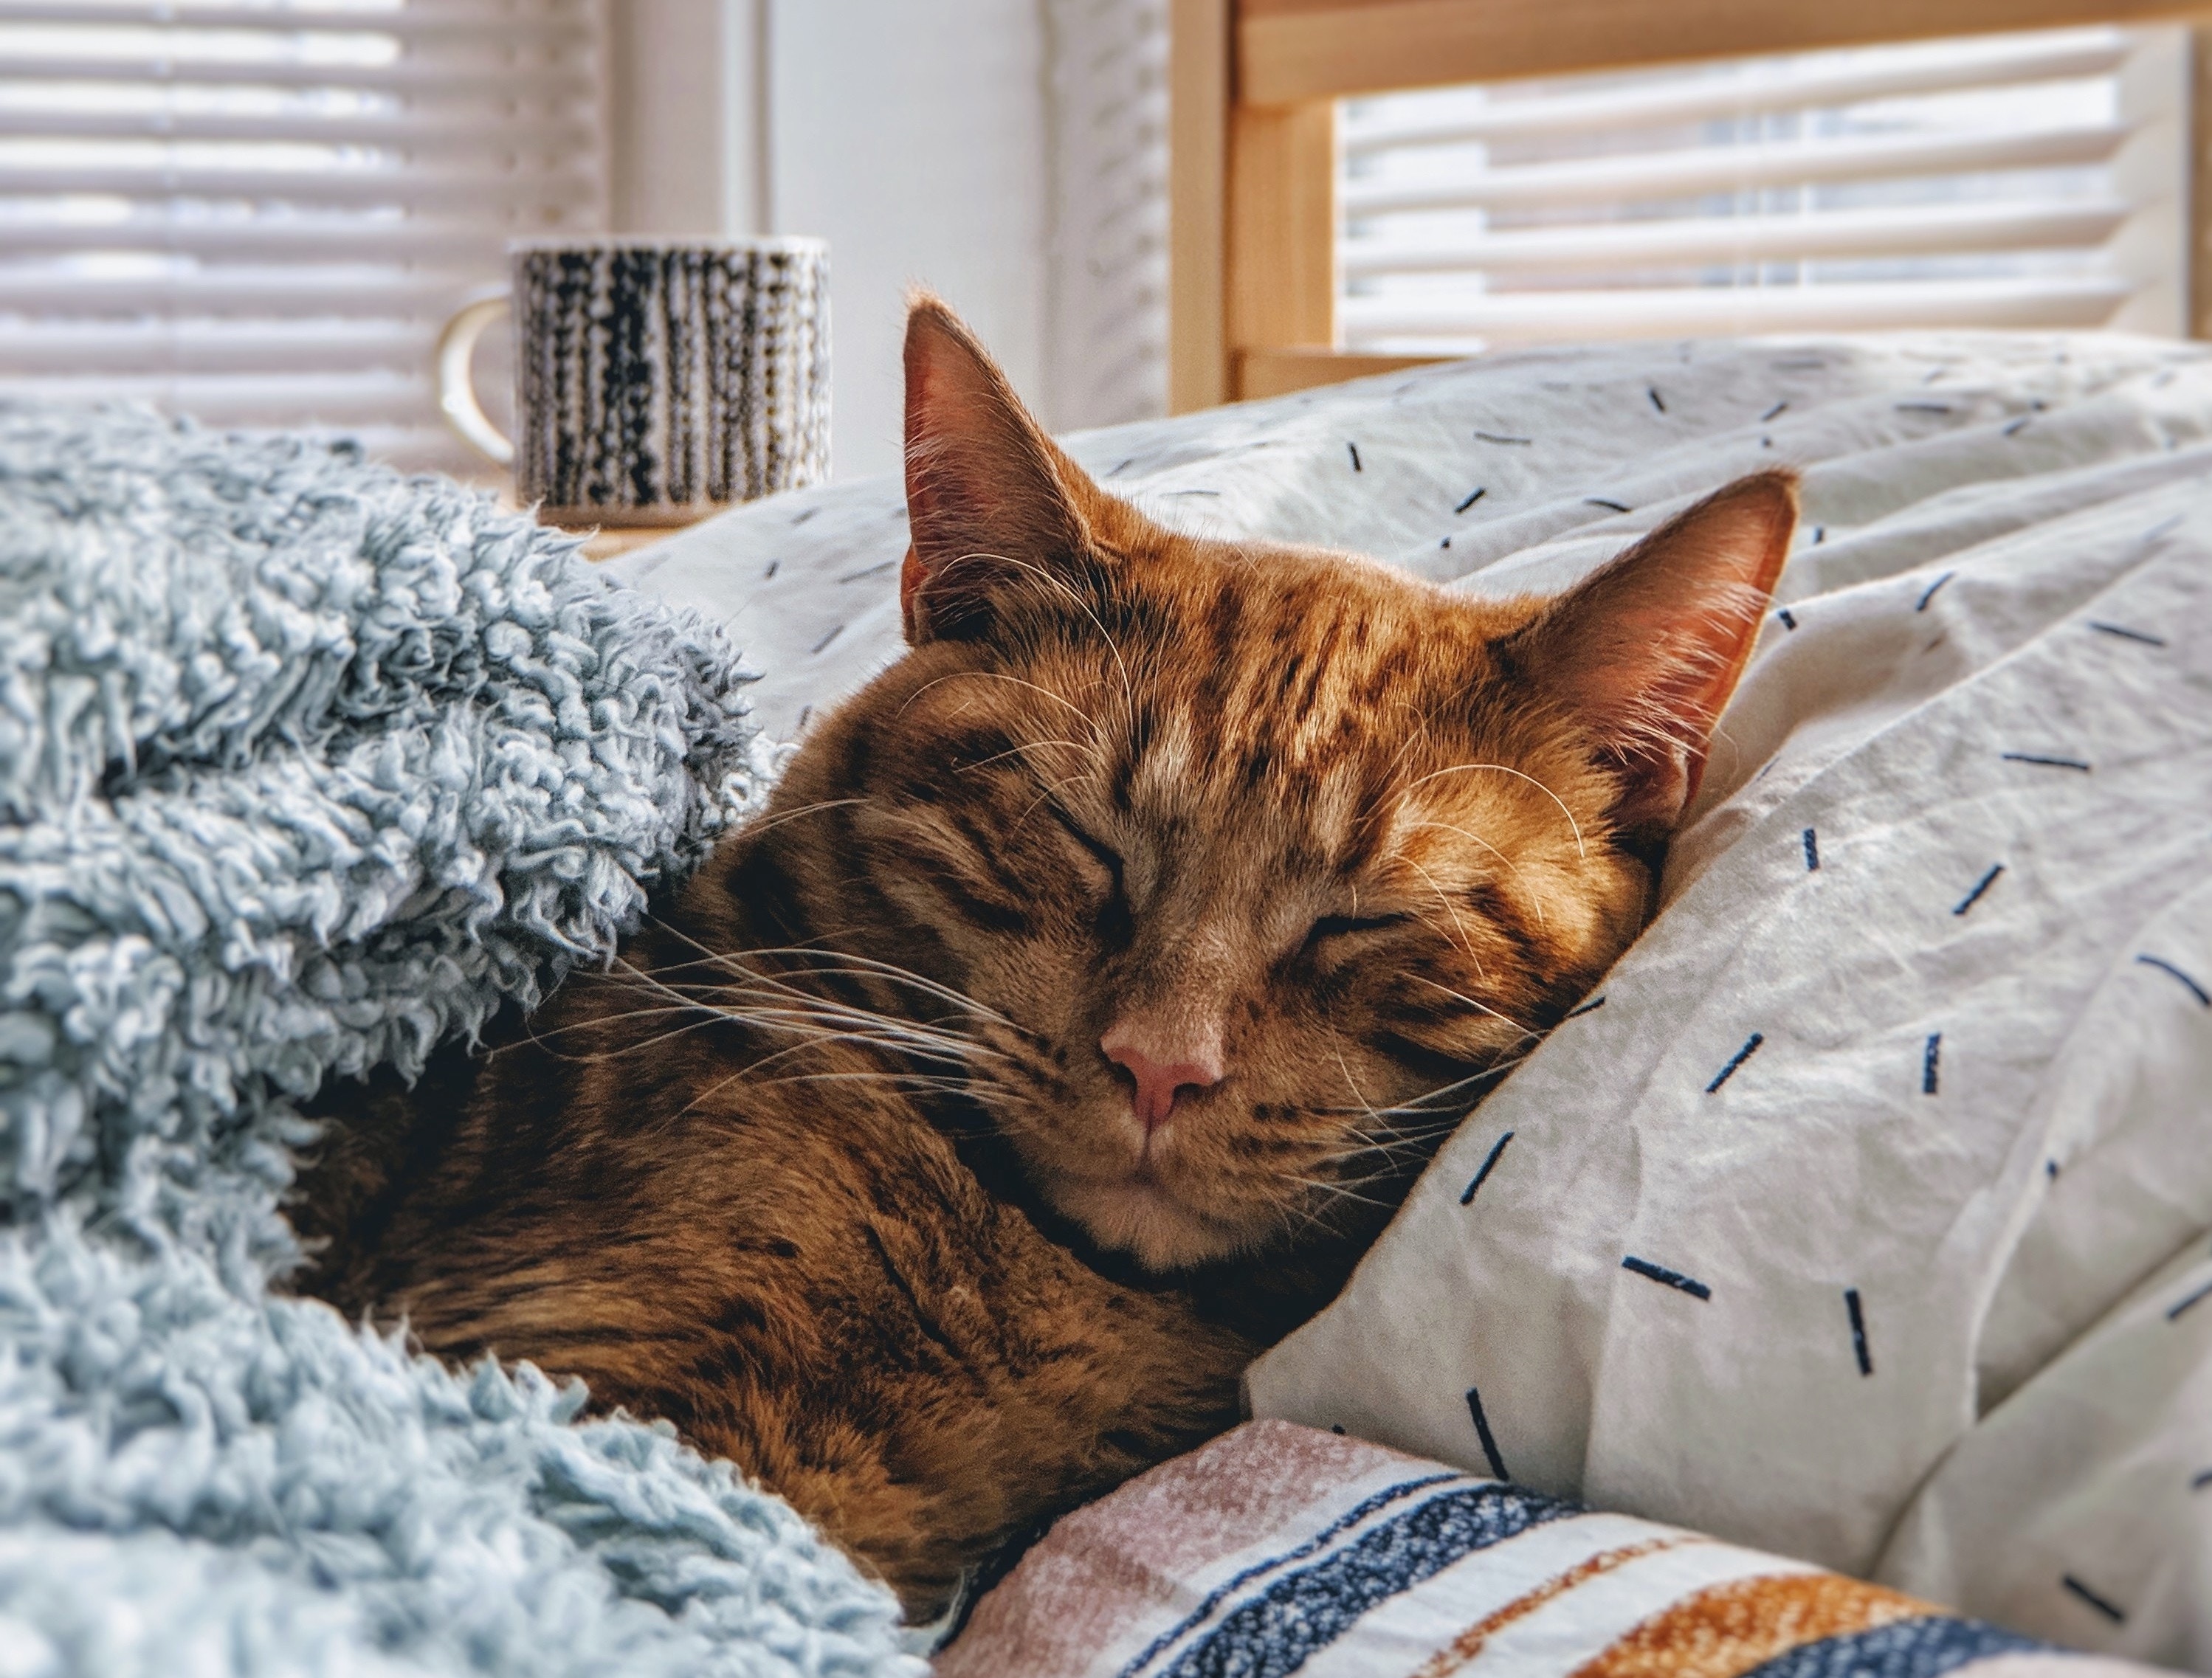 Cat asleep in bed | The supply of for-sale homes grew in January 2019, up 6 percent annually, and in the most expensive markets, for-sale supply increased 12 percent in that time.